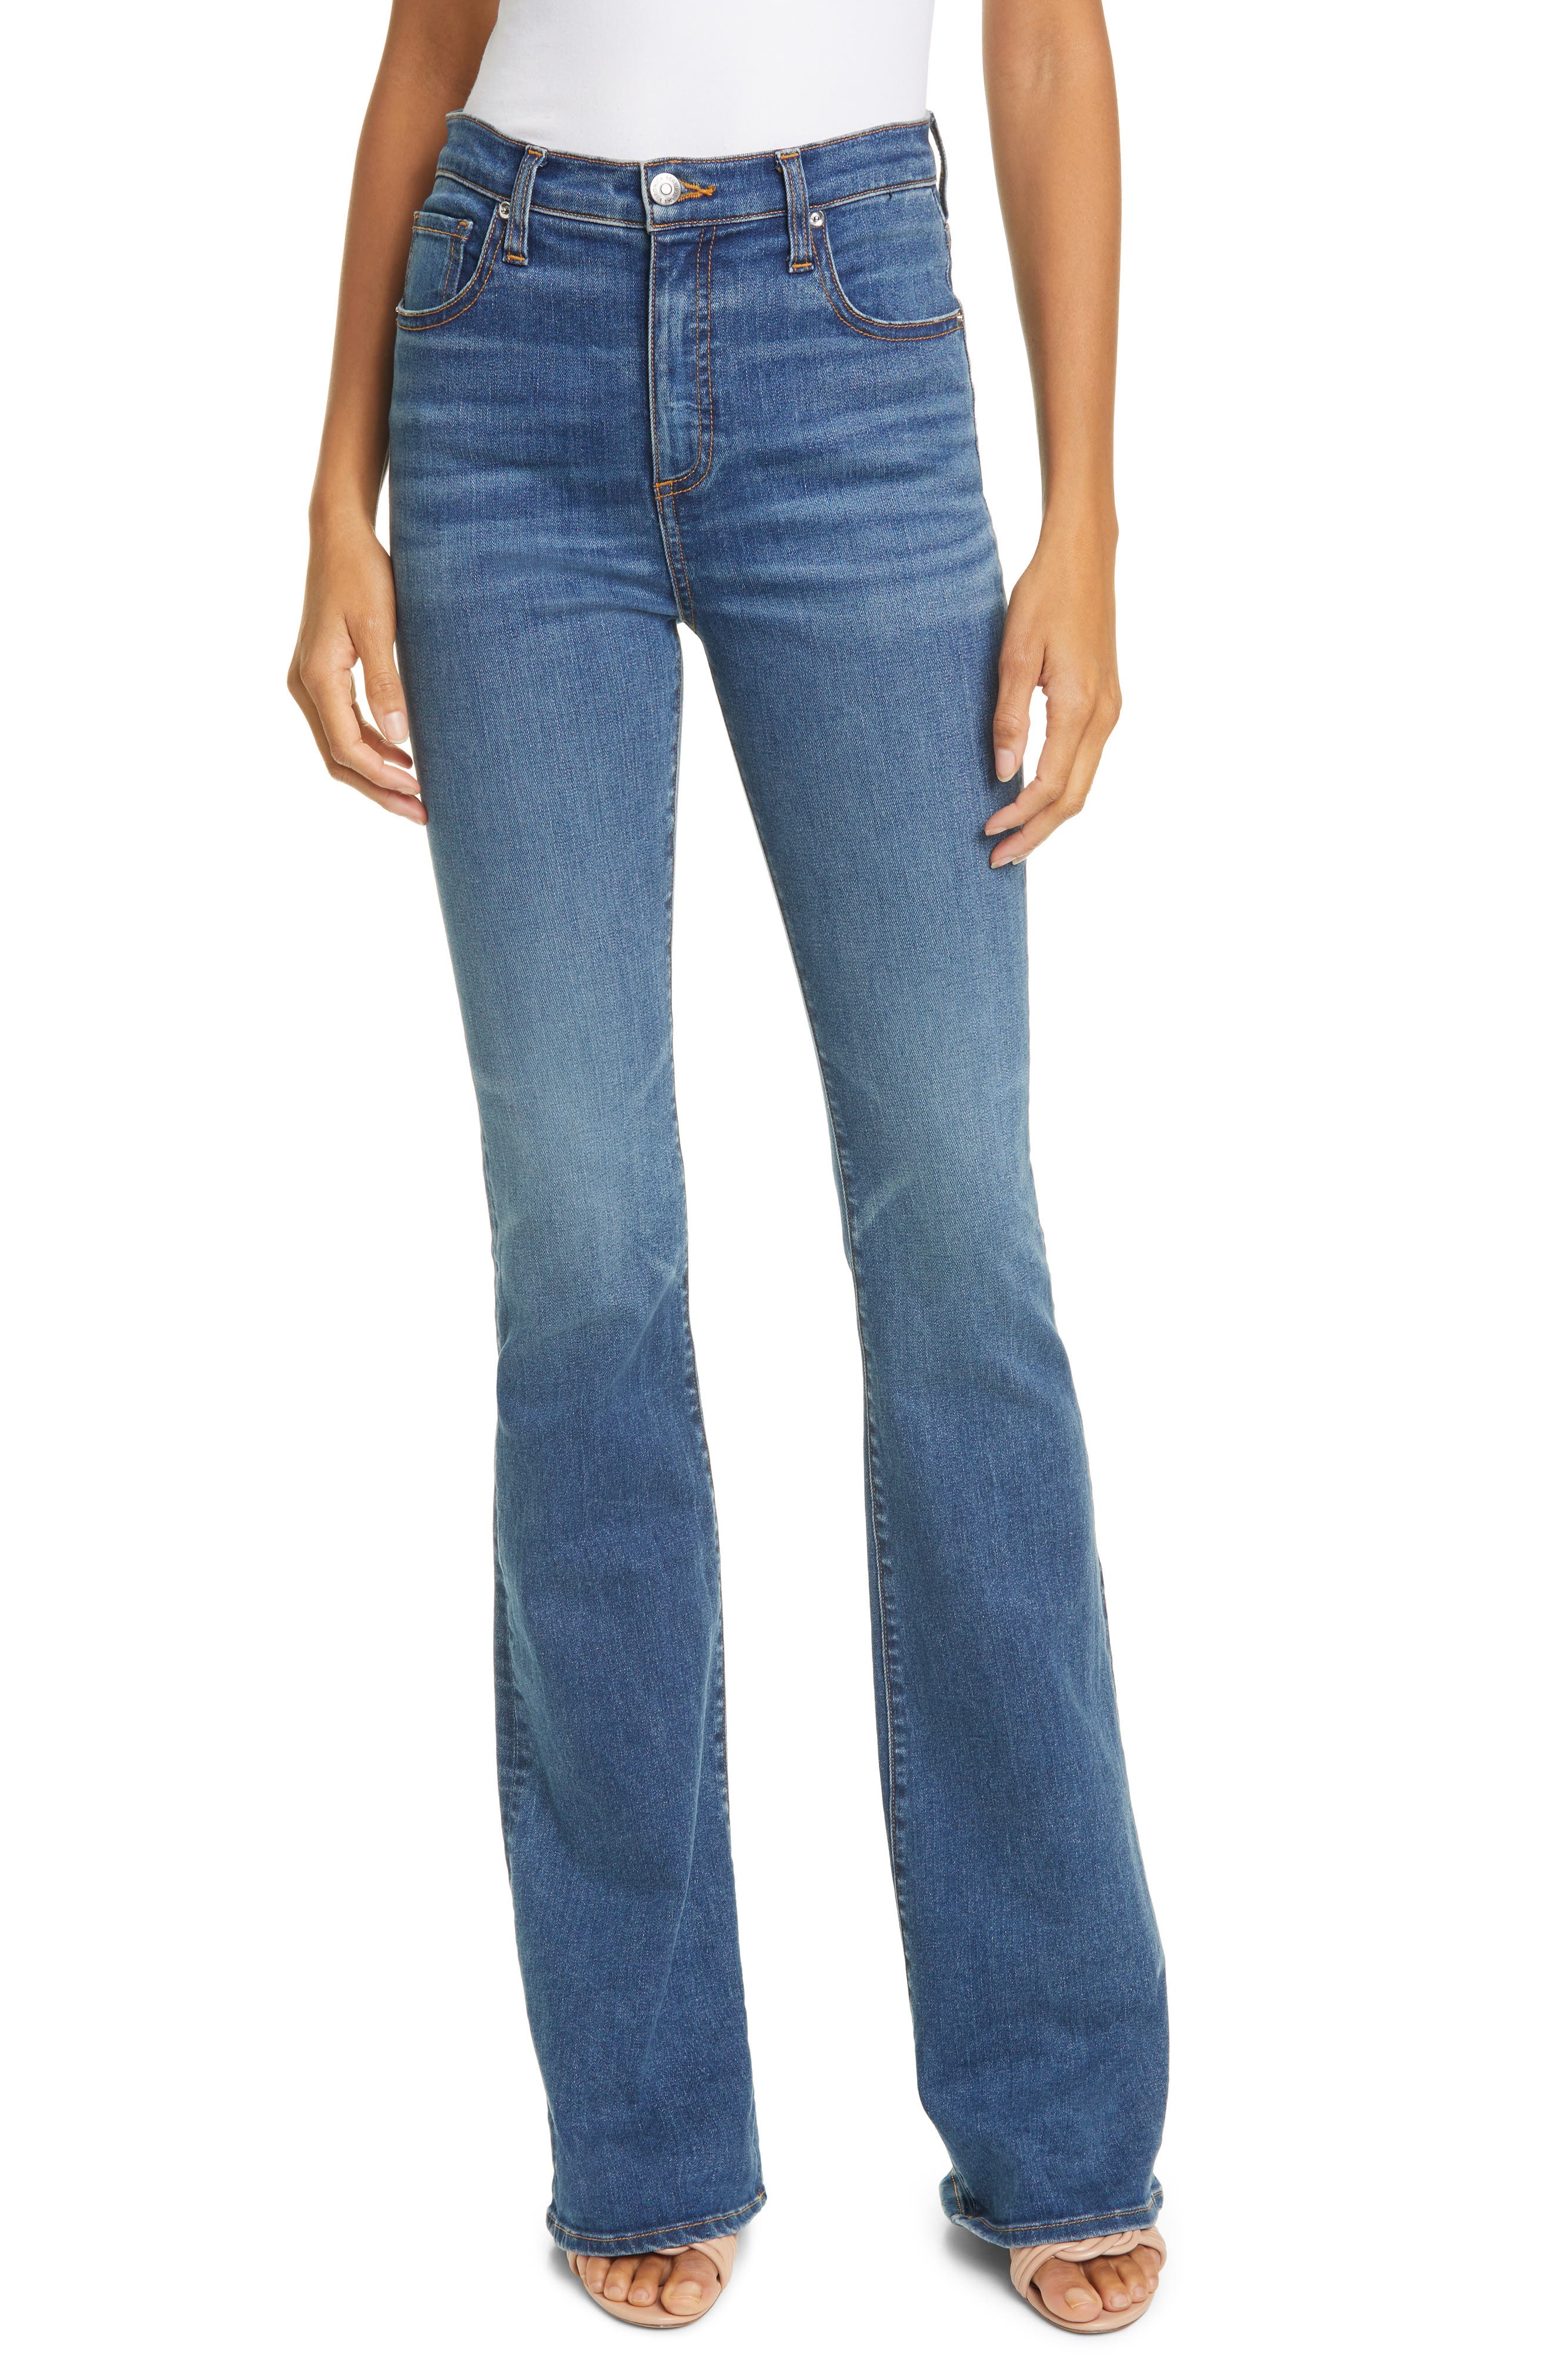 size 24 flare jeans